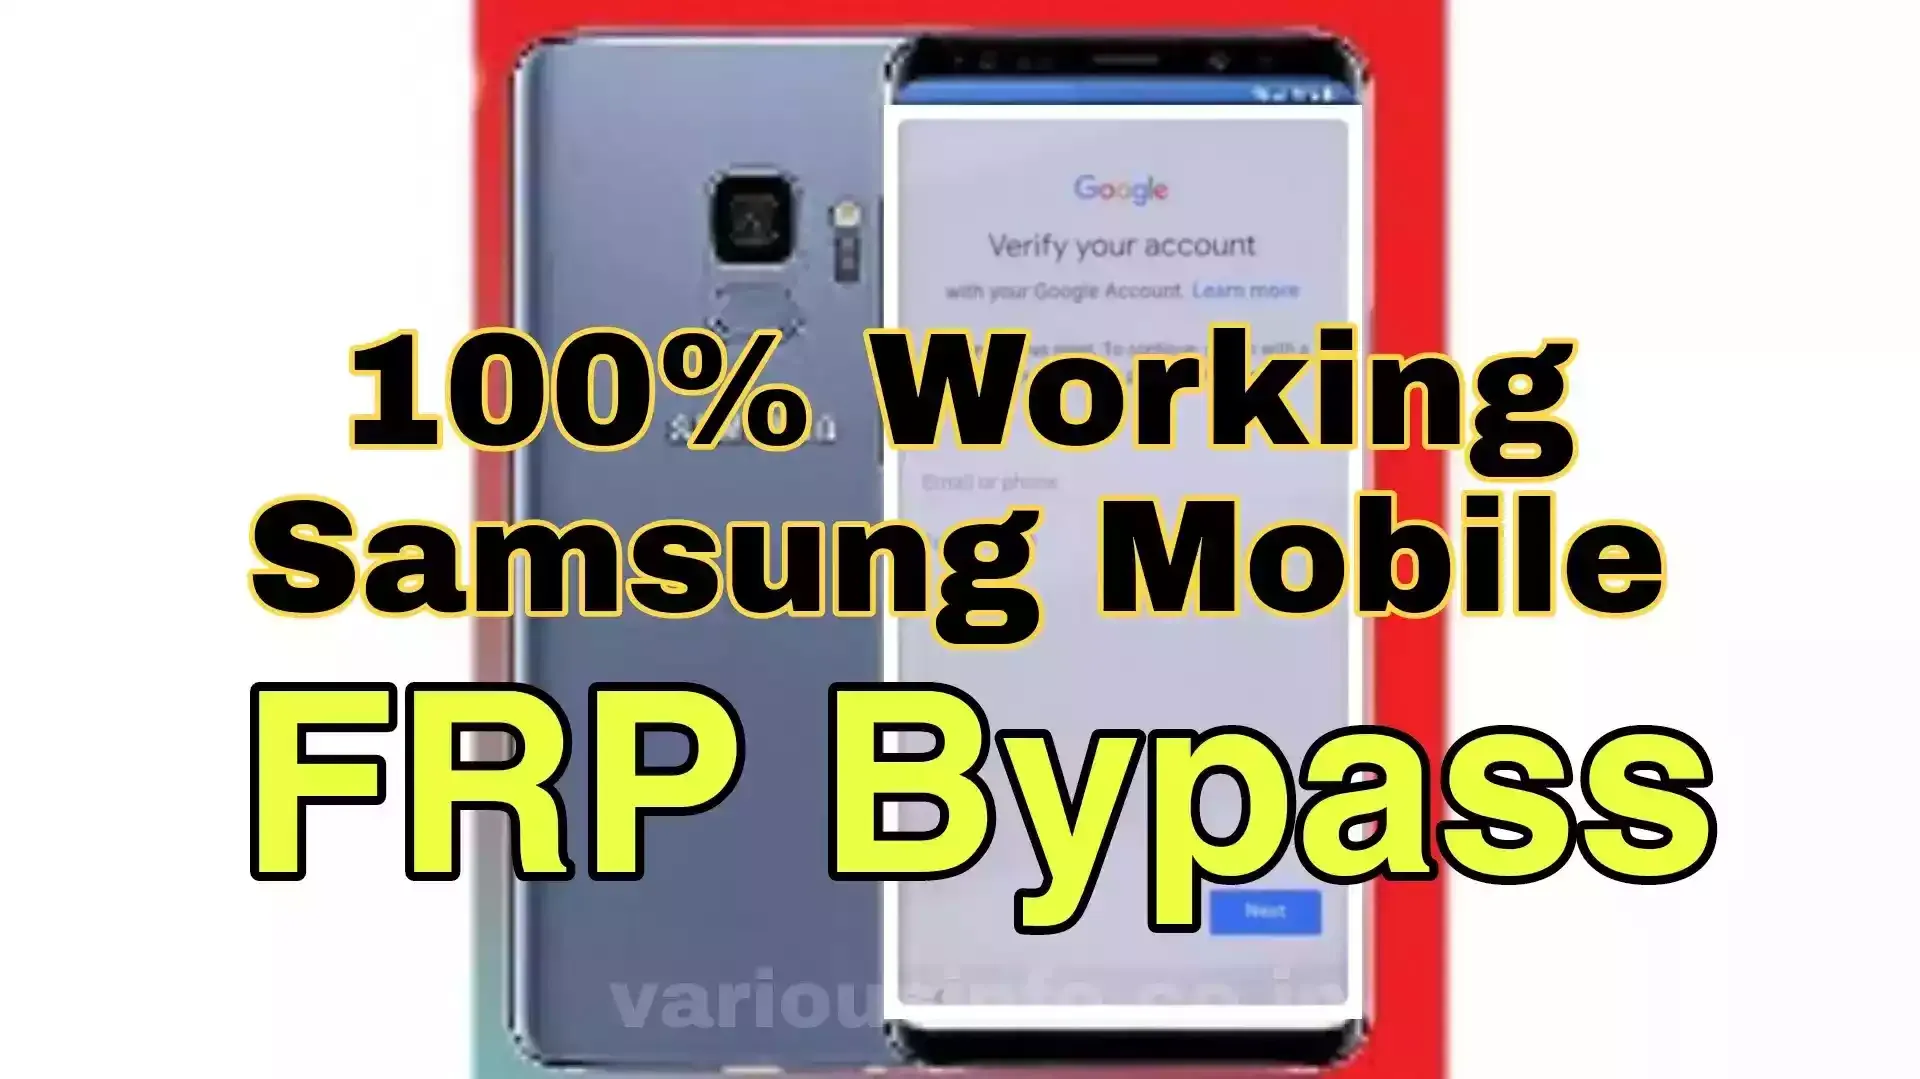 How To Bypass Samsung Smartphone FRP Lock Without PC in hindi | google account bypass trick in hindi